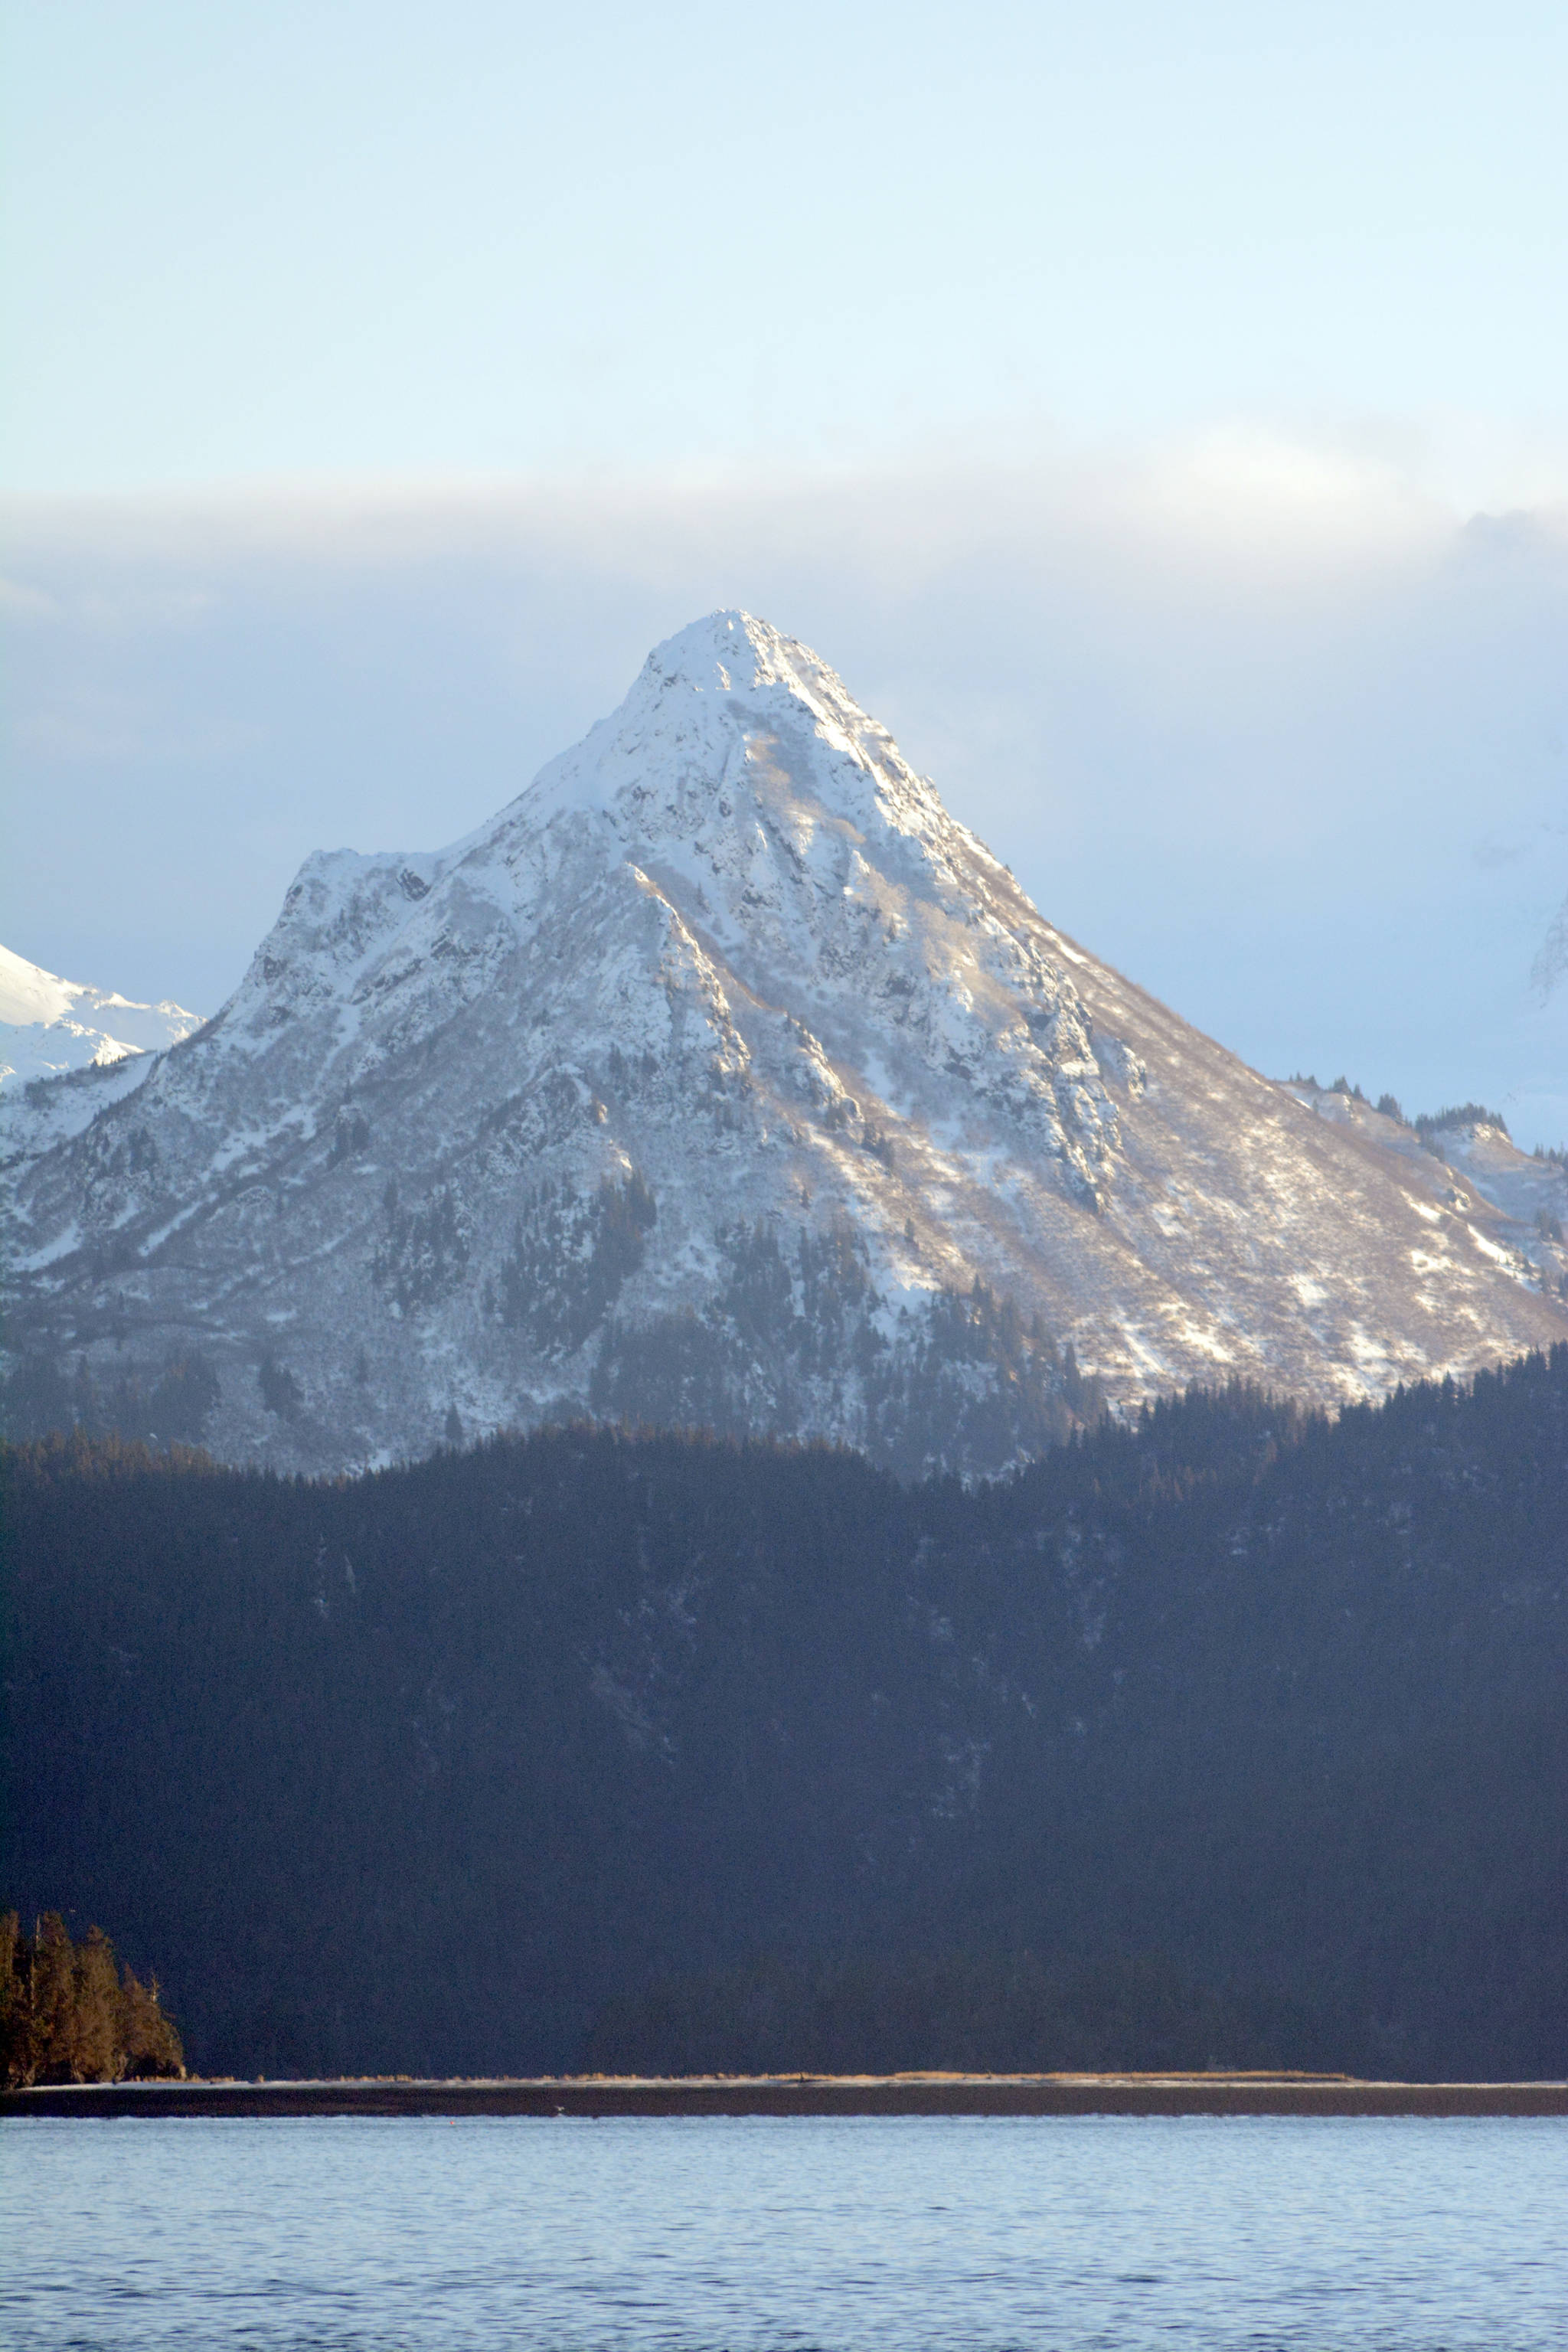 It’s back The bear in the side of Poot Peak has emerged for the winter after snow fell on the mountain last Friday, Dec. 8, highlighting the image of of a head, nose and eyes. (Photo by Michael Armstrong, Homer News)